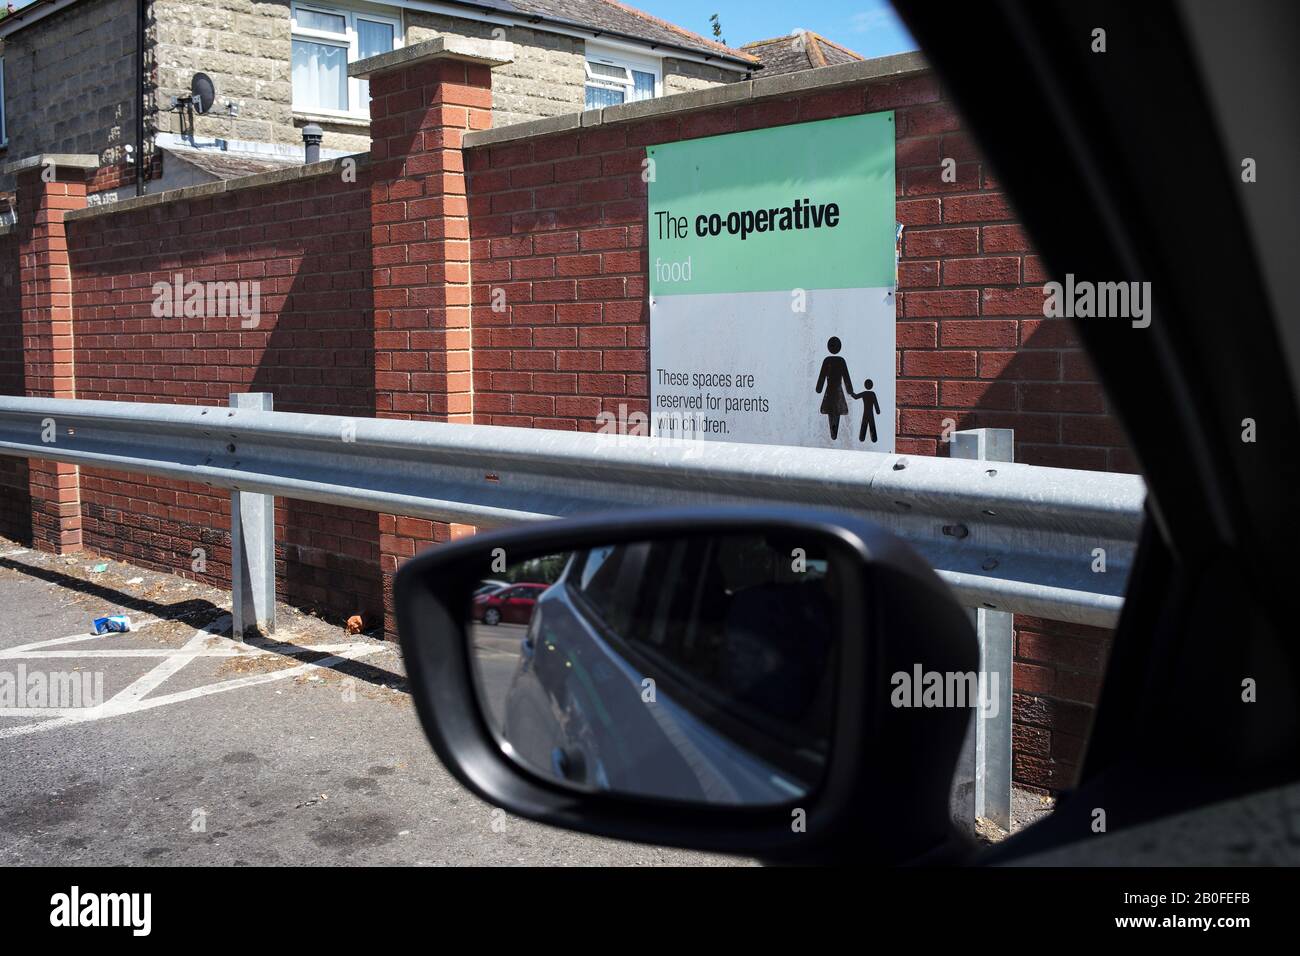 Family parking sign at the Co-op food supermarket shop car park area from the view from inside of a car. Stock Photo